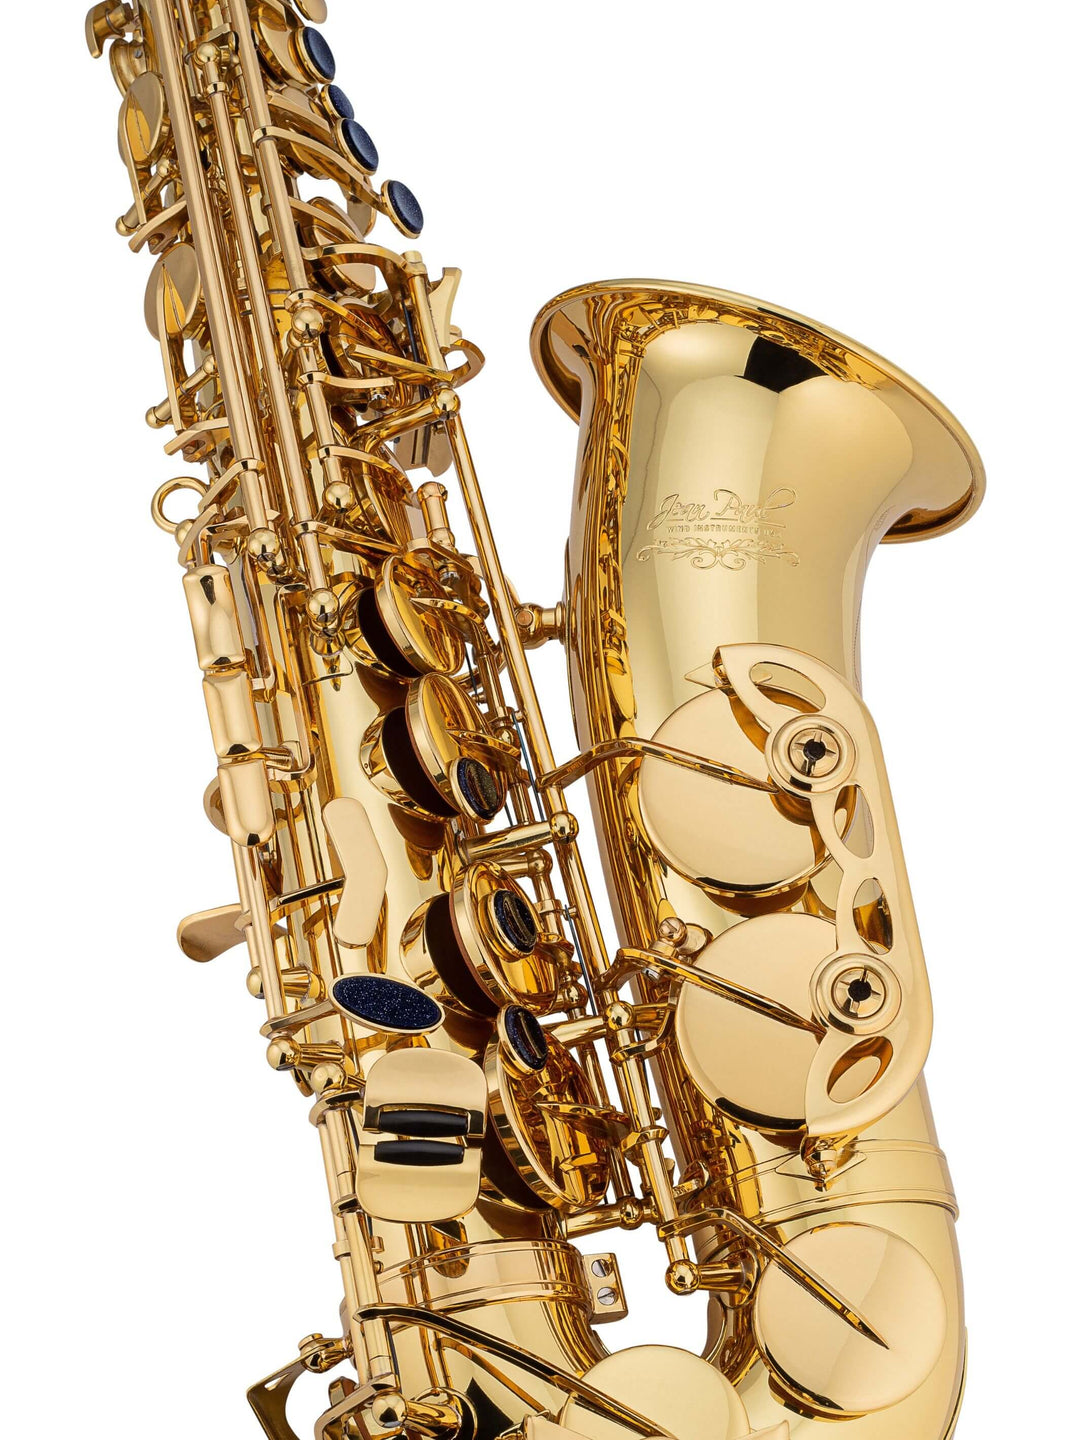 New Blue and Gold Alto Saxophone in Case - Suitable for both